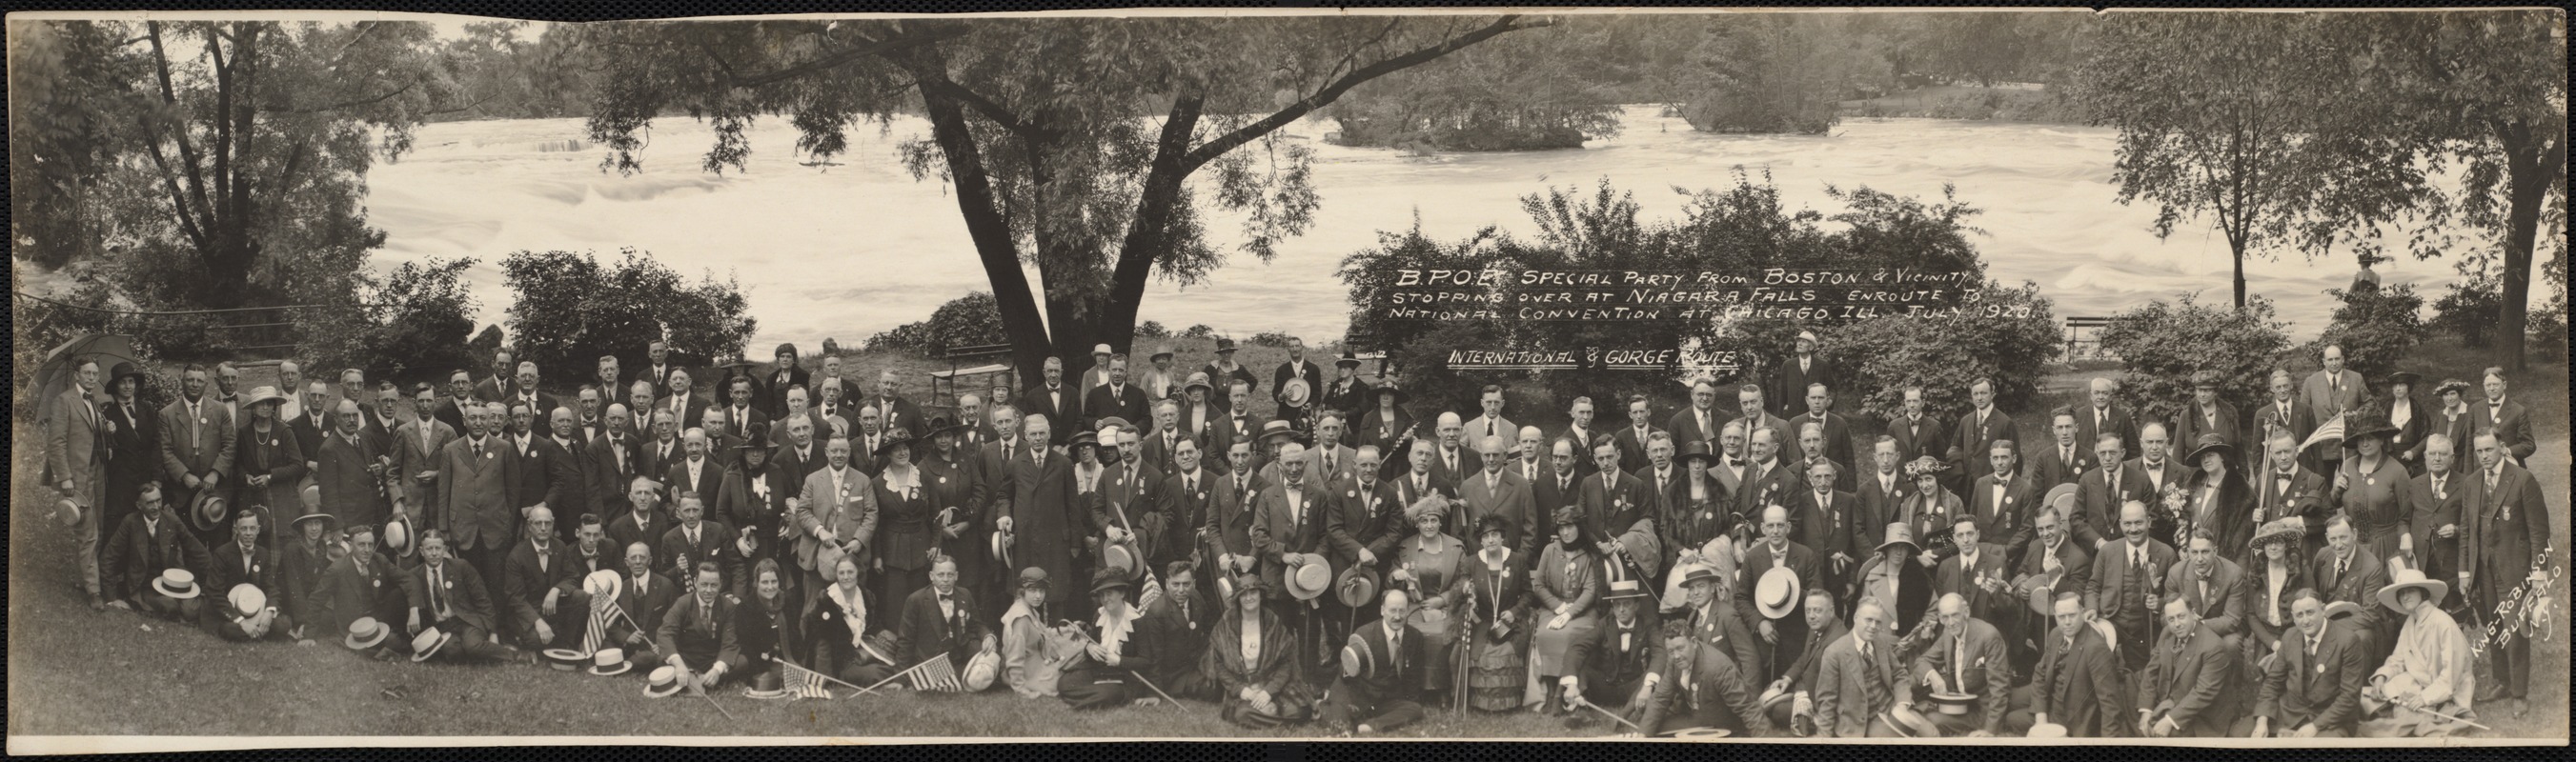 B. P. O. E. special party from Boston & vicinity, stopping over at Niagara Falls enroute [sic] to  National Convention at Chicago